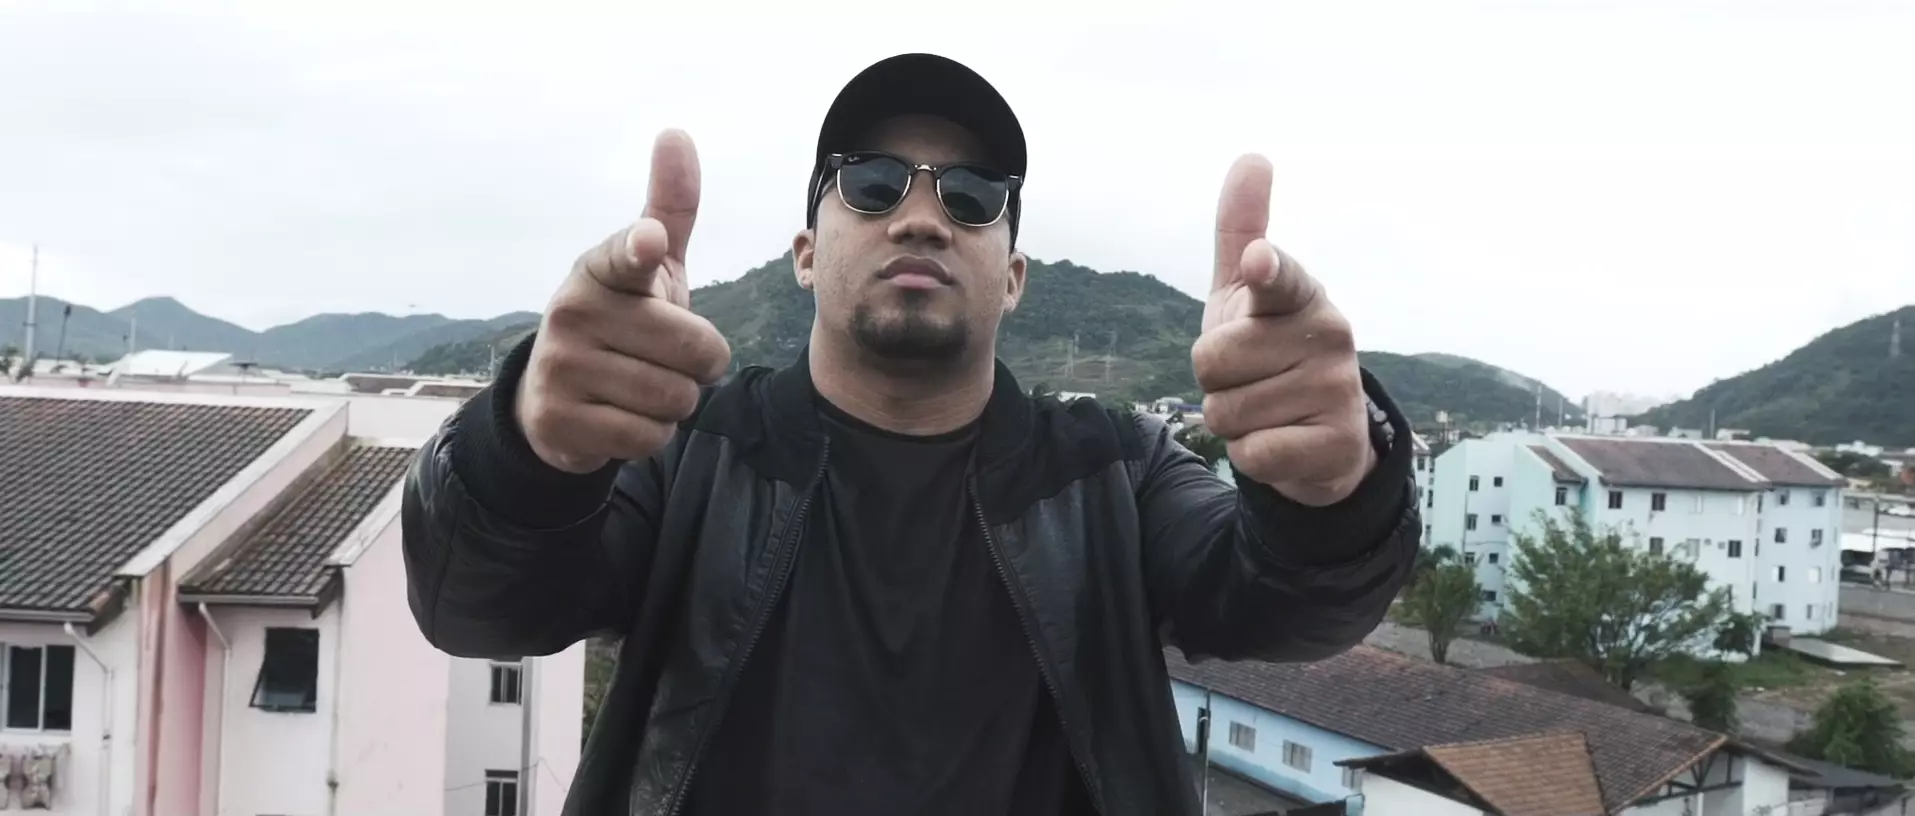 KondZilla has worked with some of the most famous Brazilian artists